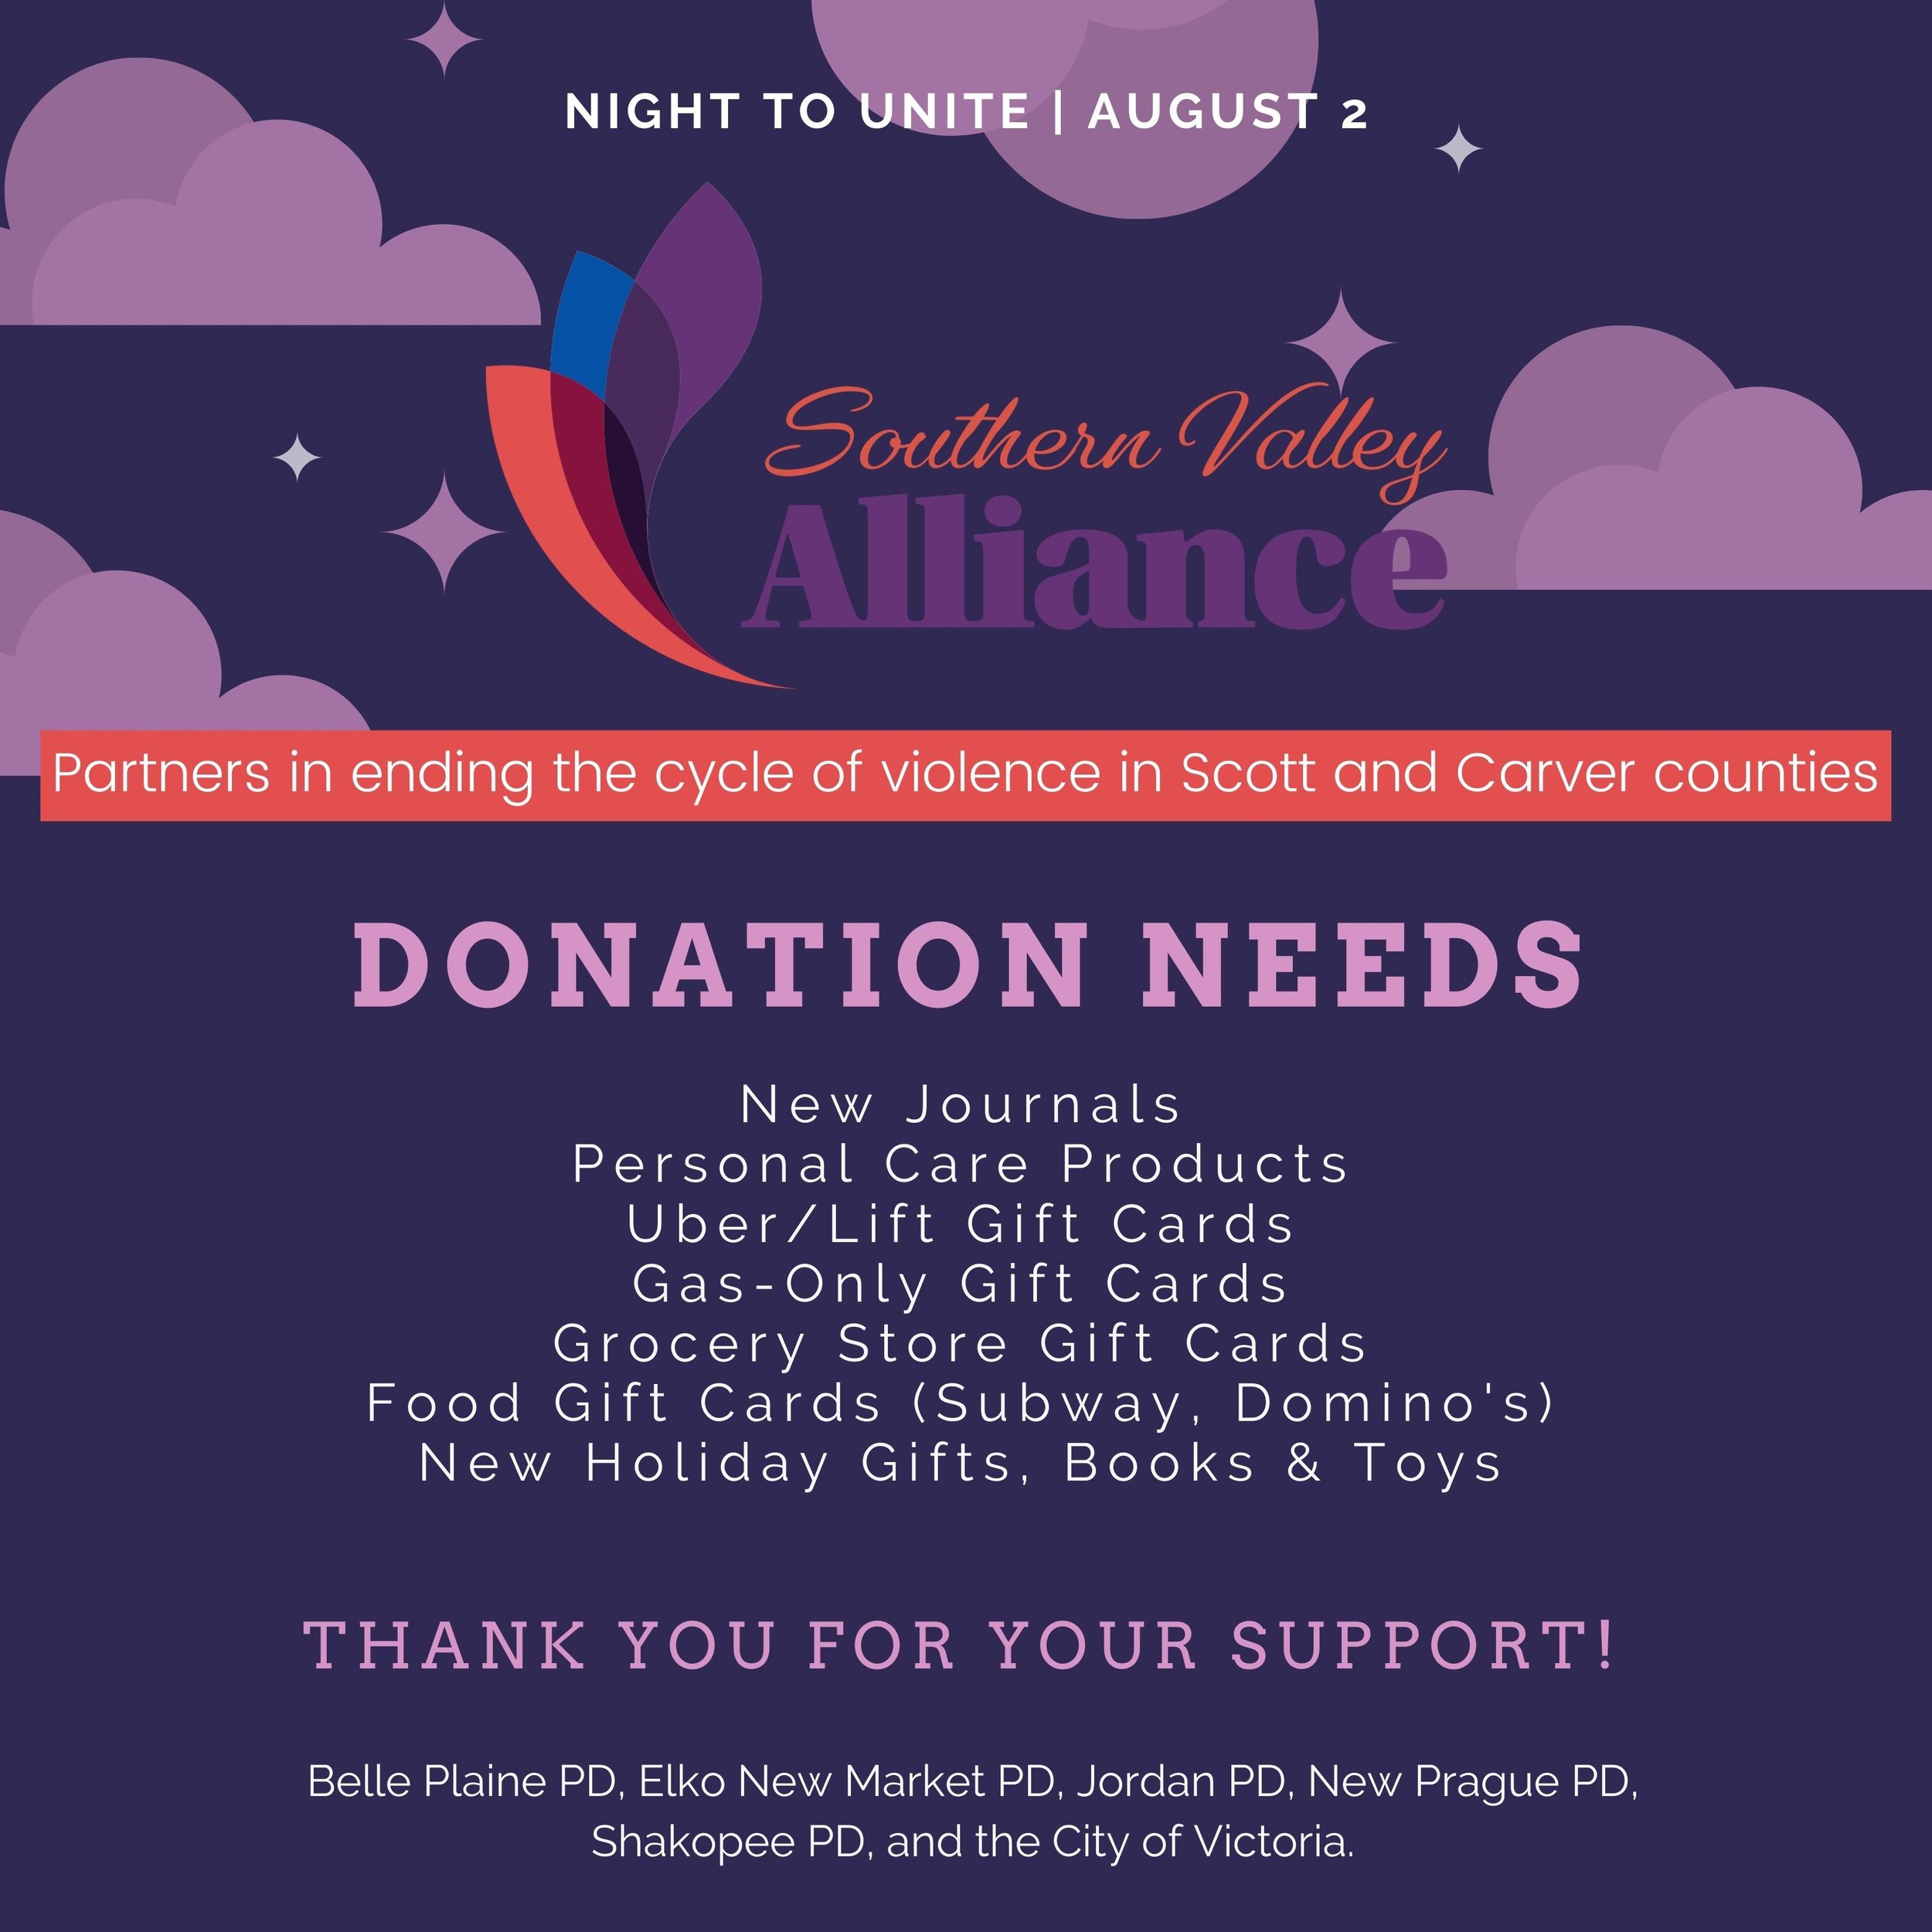 Night to Unite support SVA! — Southern Valley Alliance